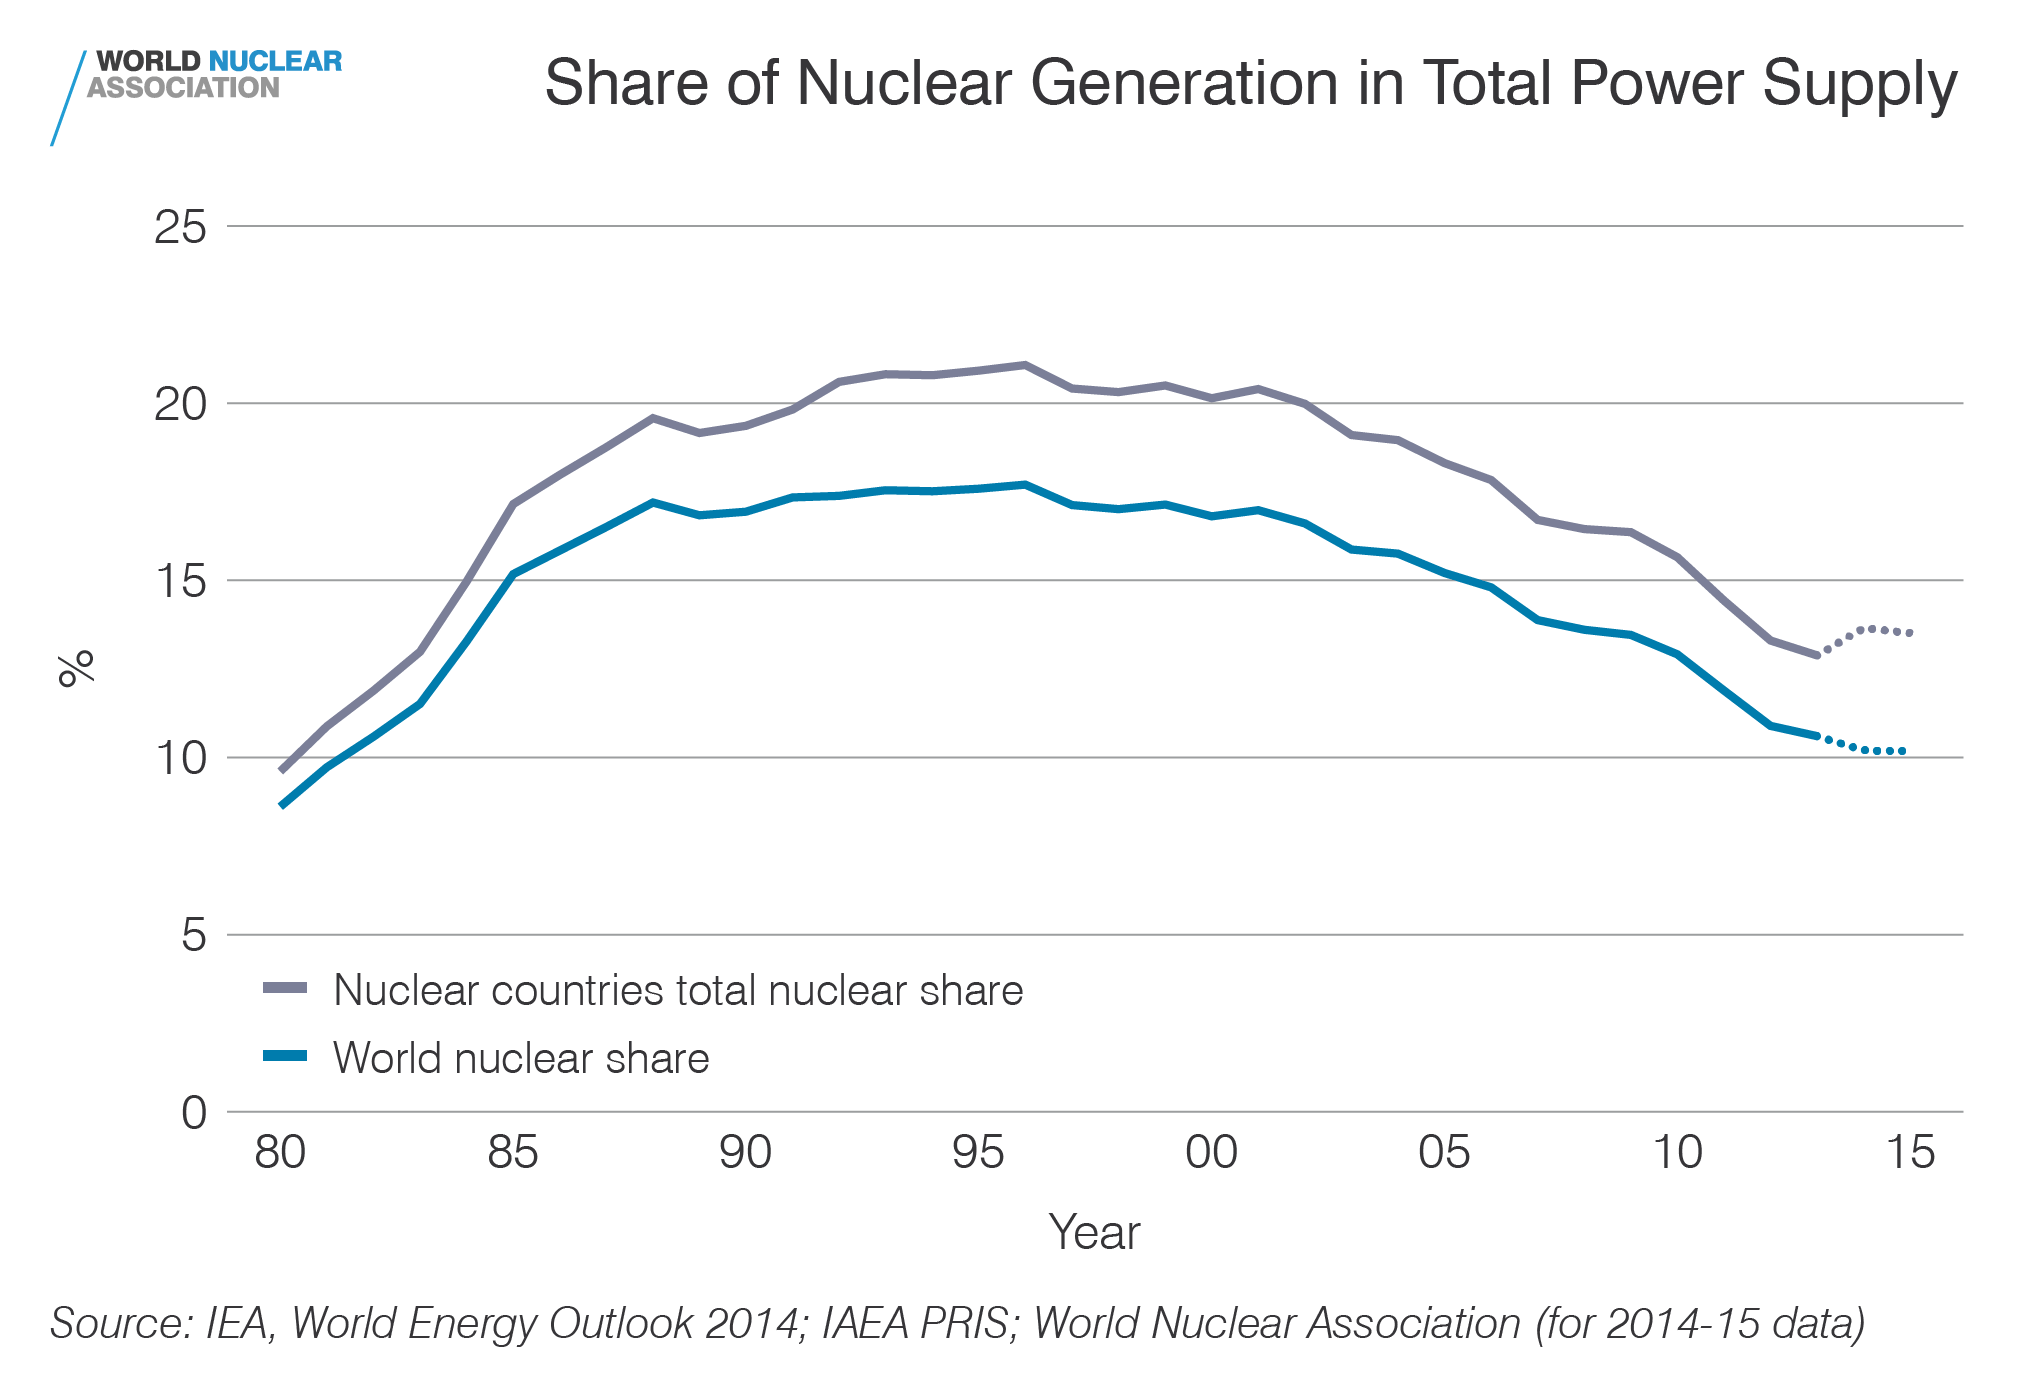 Share of nuclear generation in total power supply